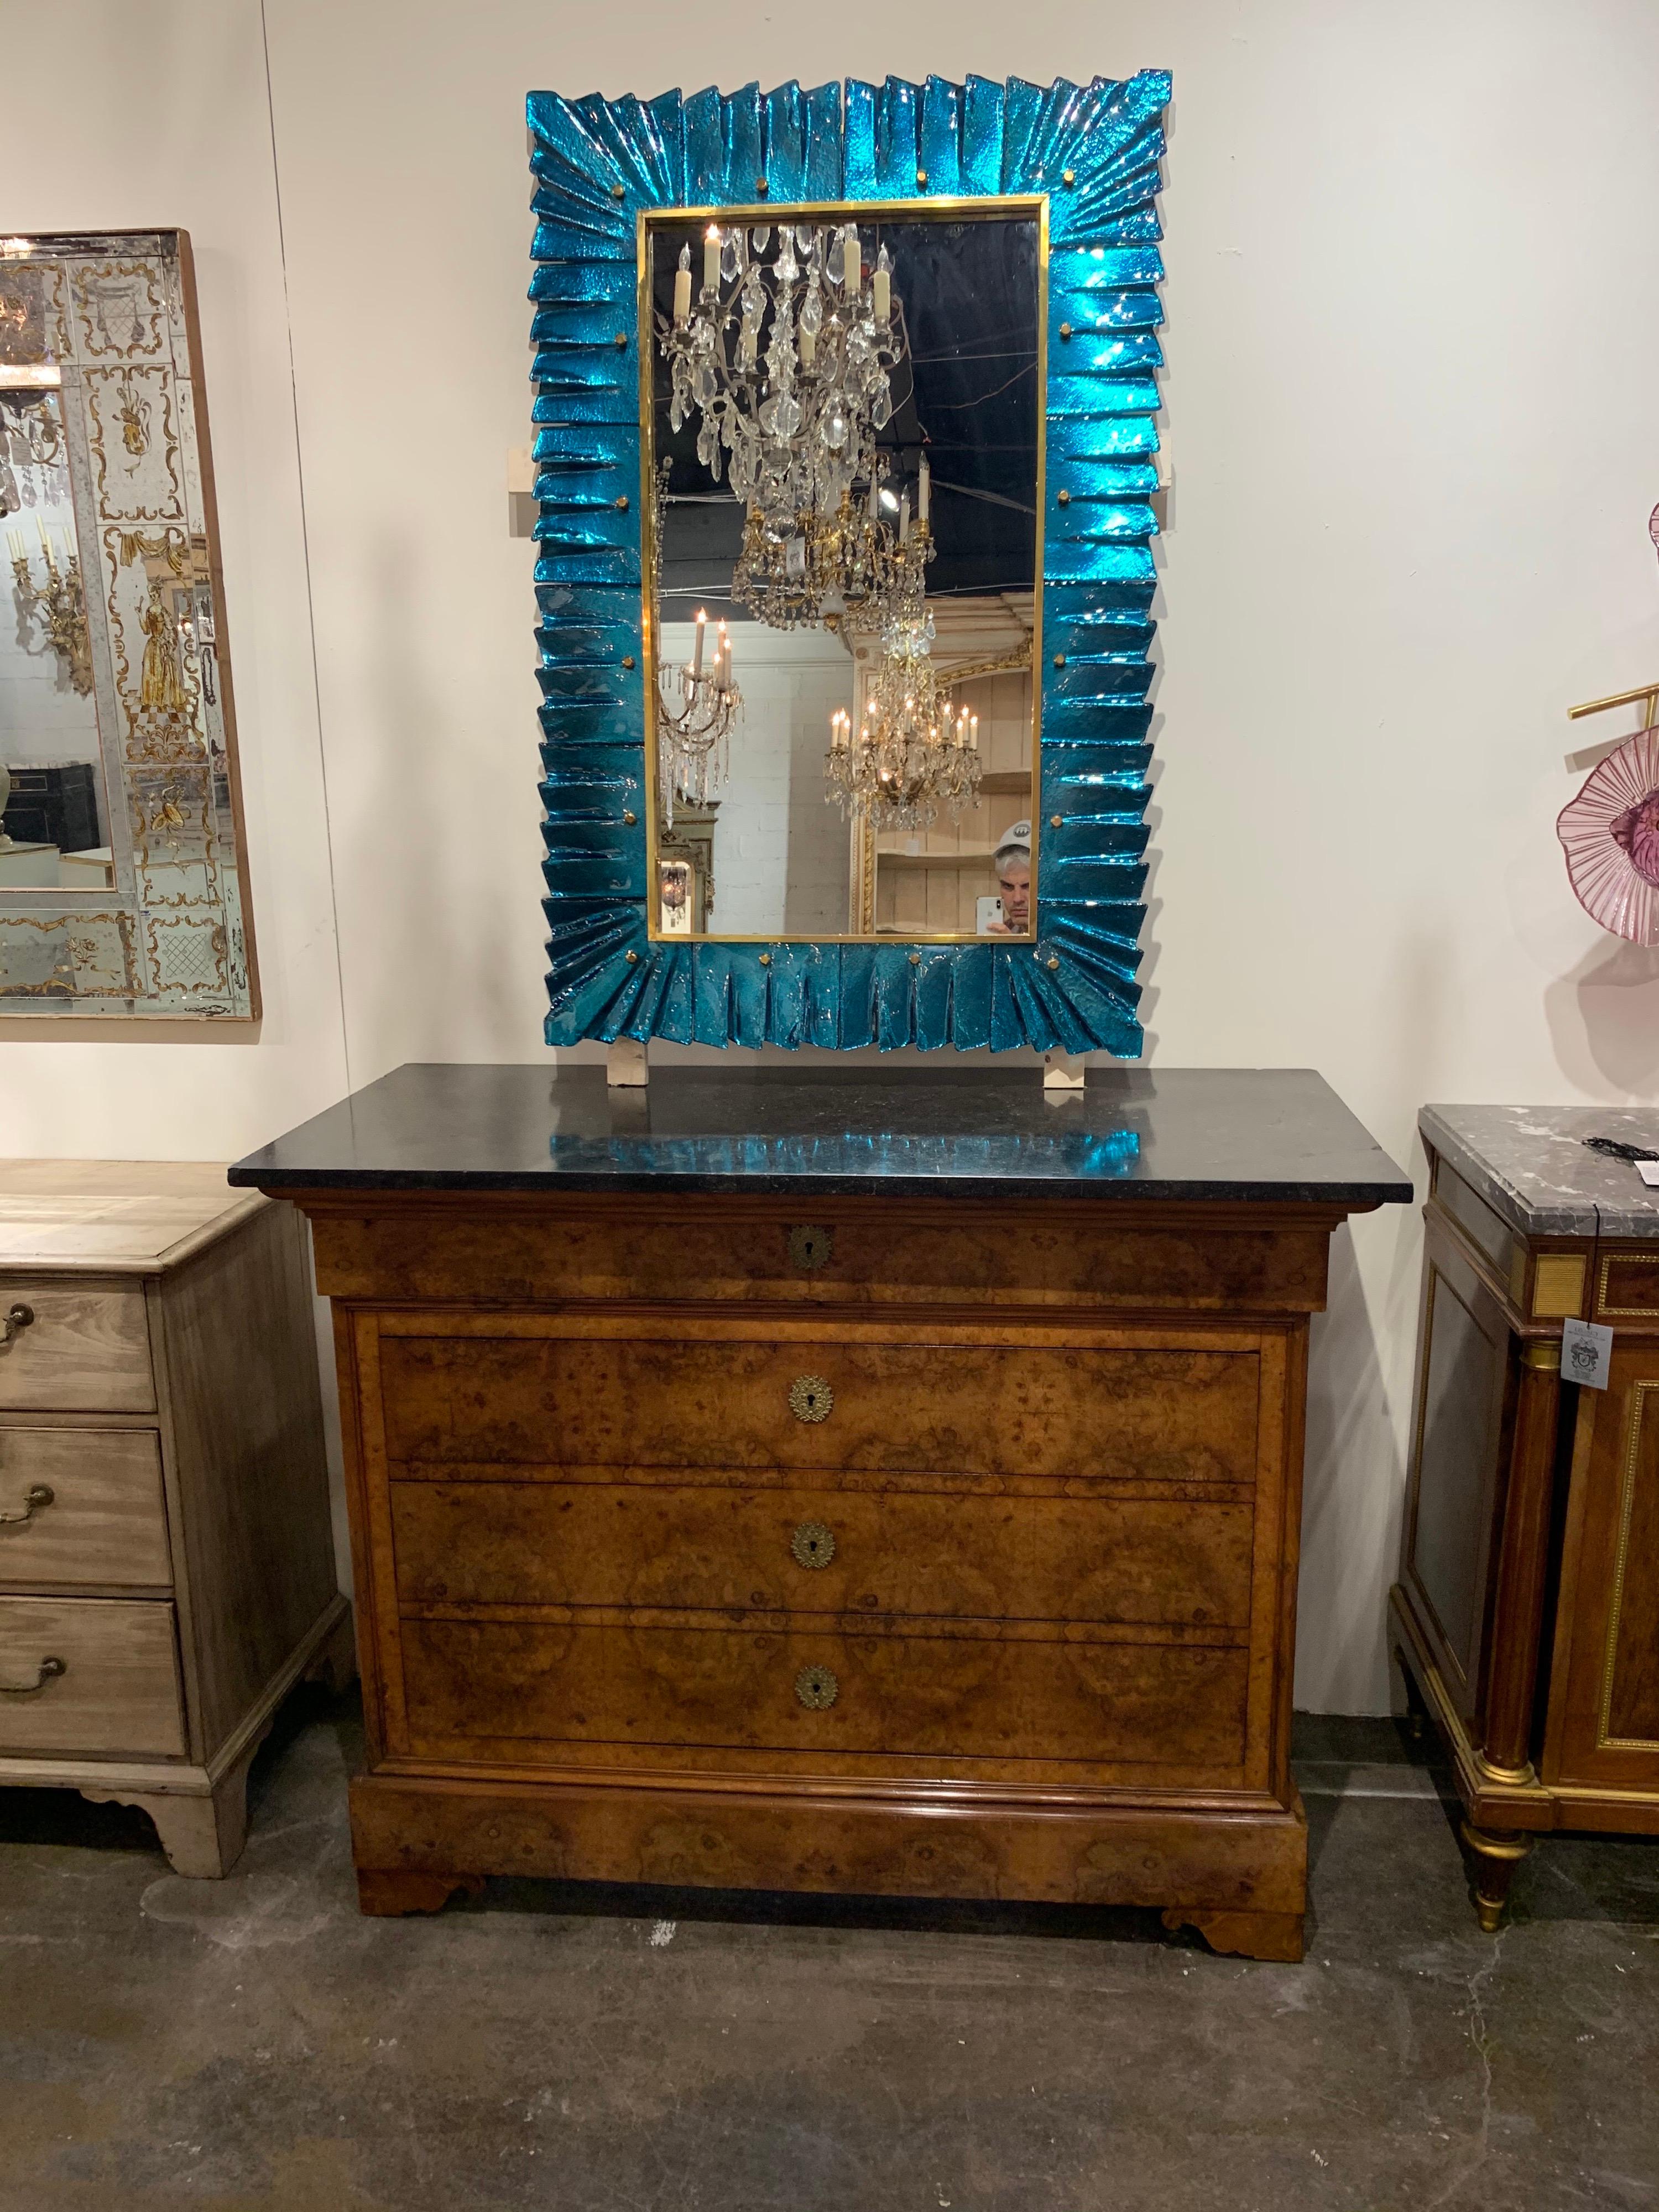 Handsome 19th century French Louis Philippe matched grain commode. The piece has a gorgeous finish and the top is a very fine piece of black Belgian marble. Very fine quality!